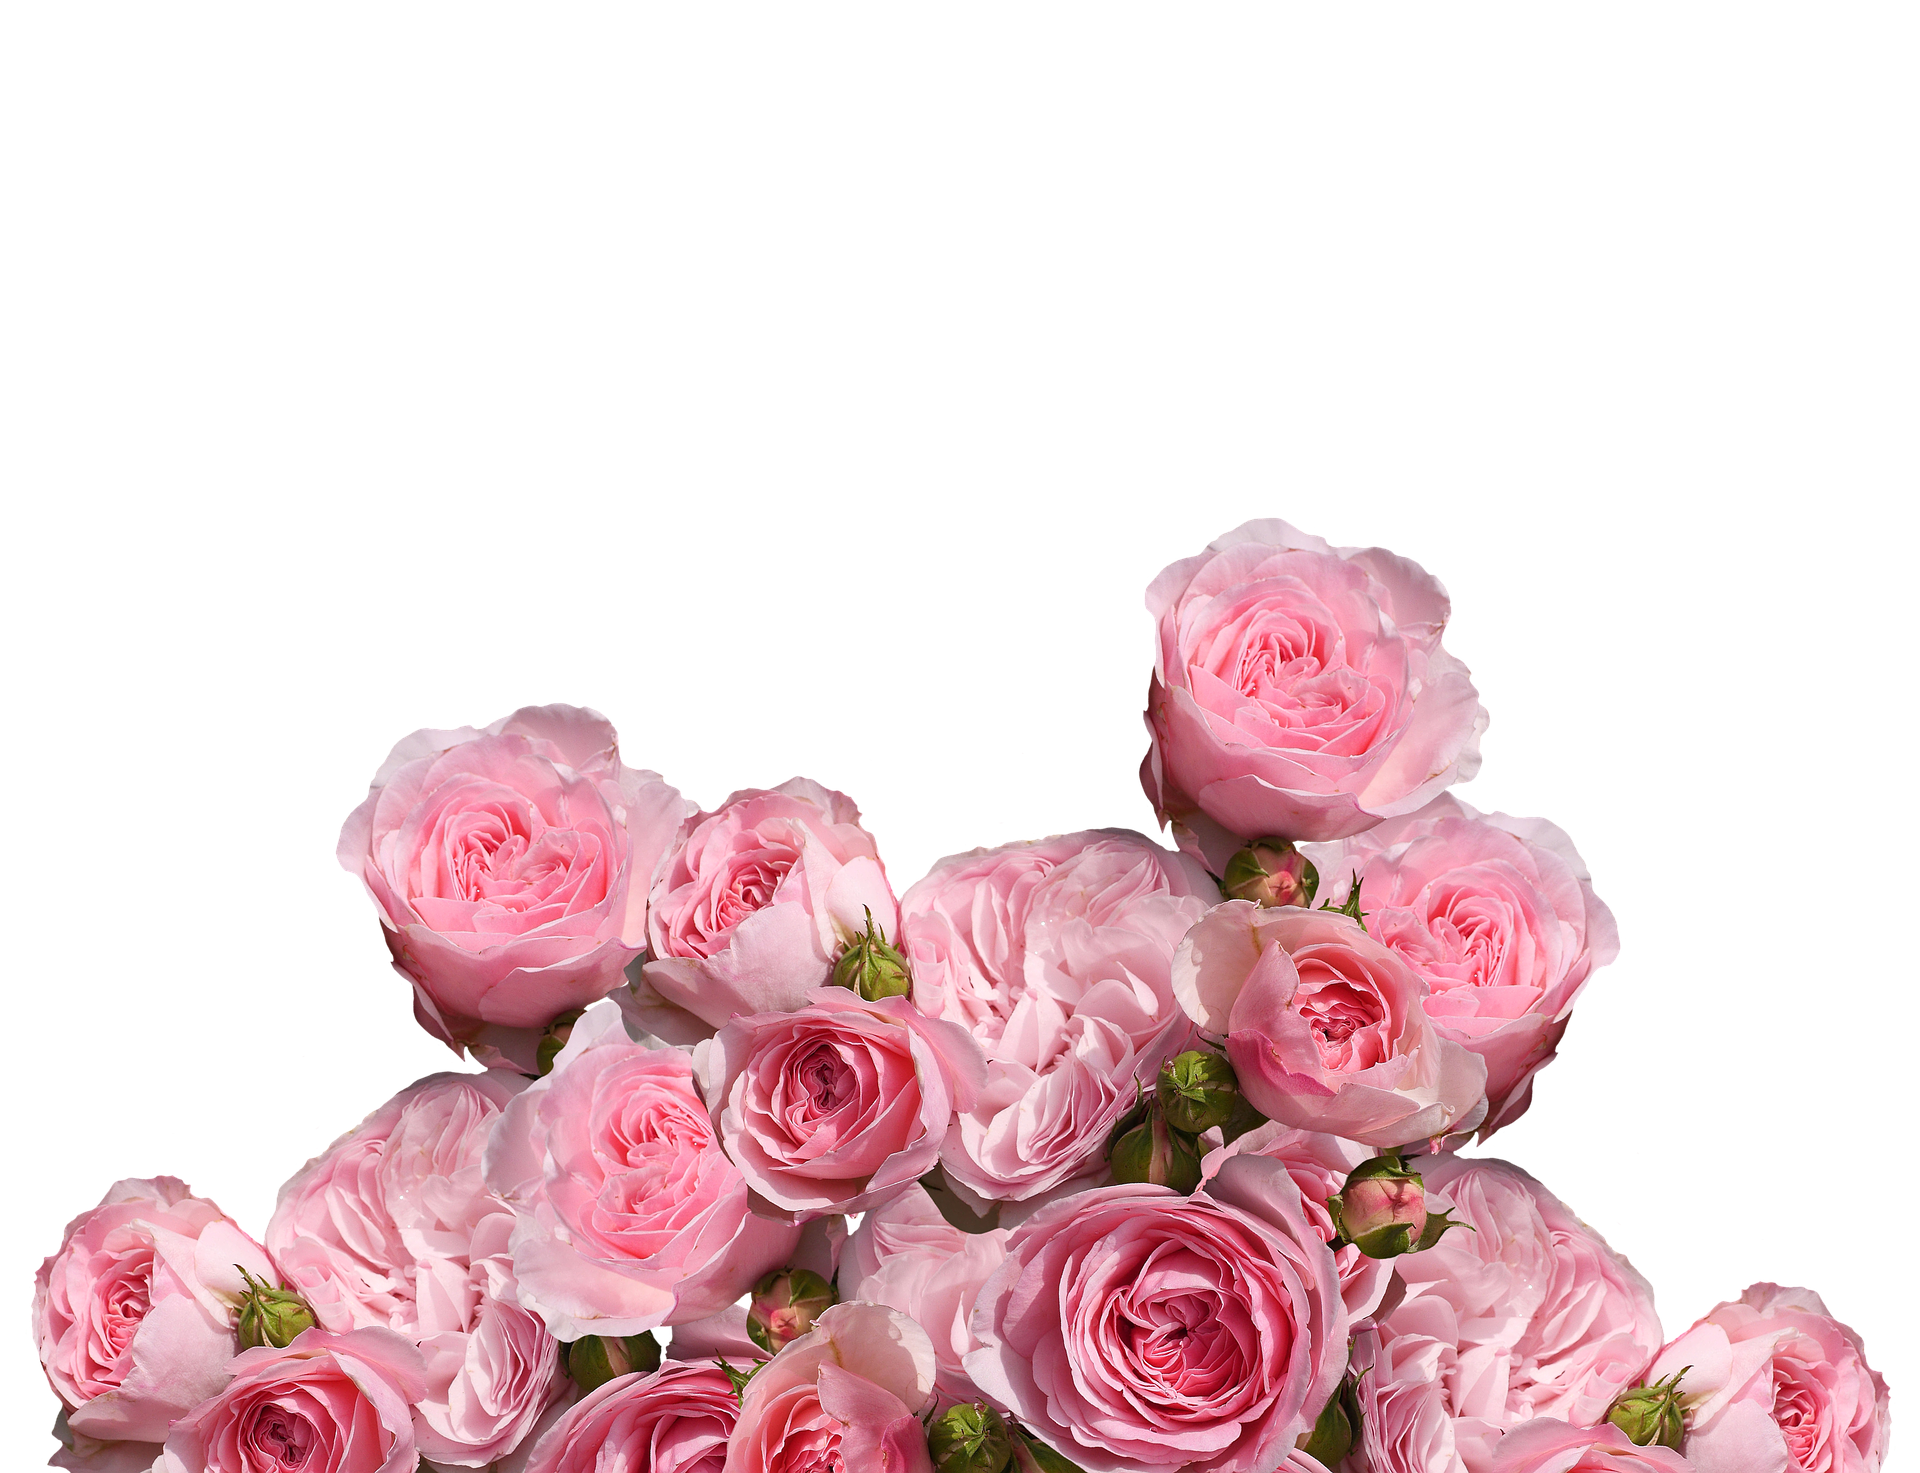 A Group Of Pink Roses